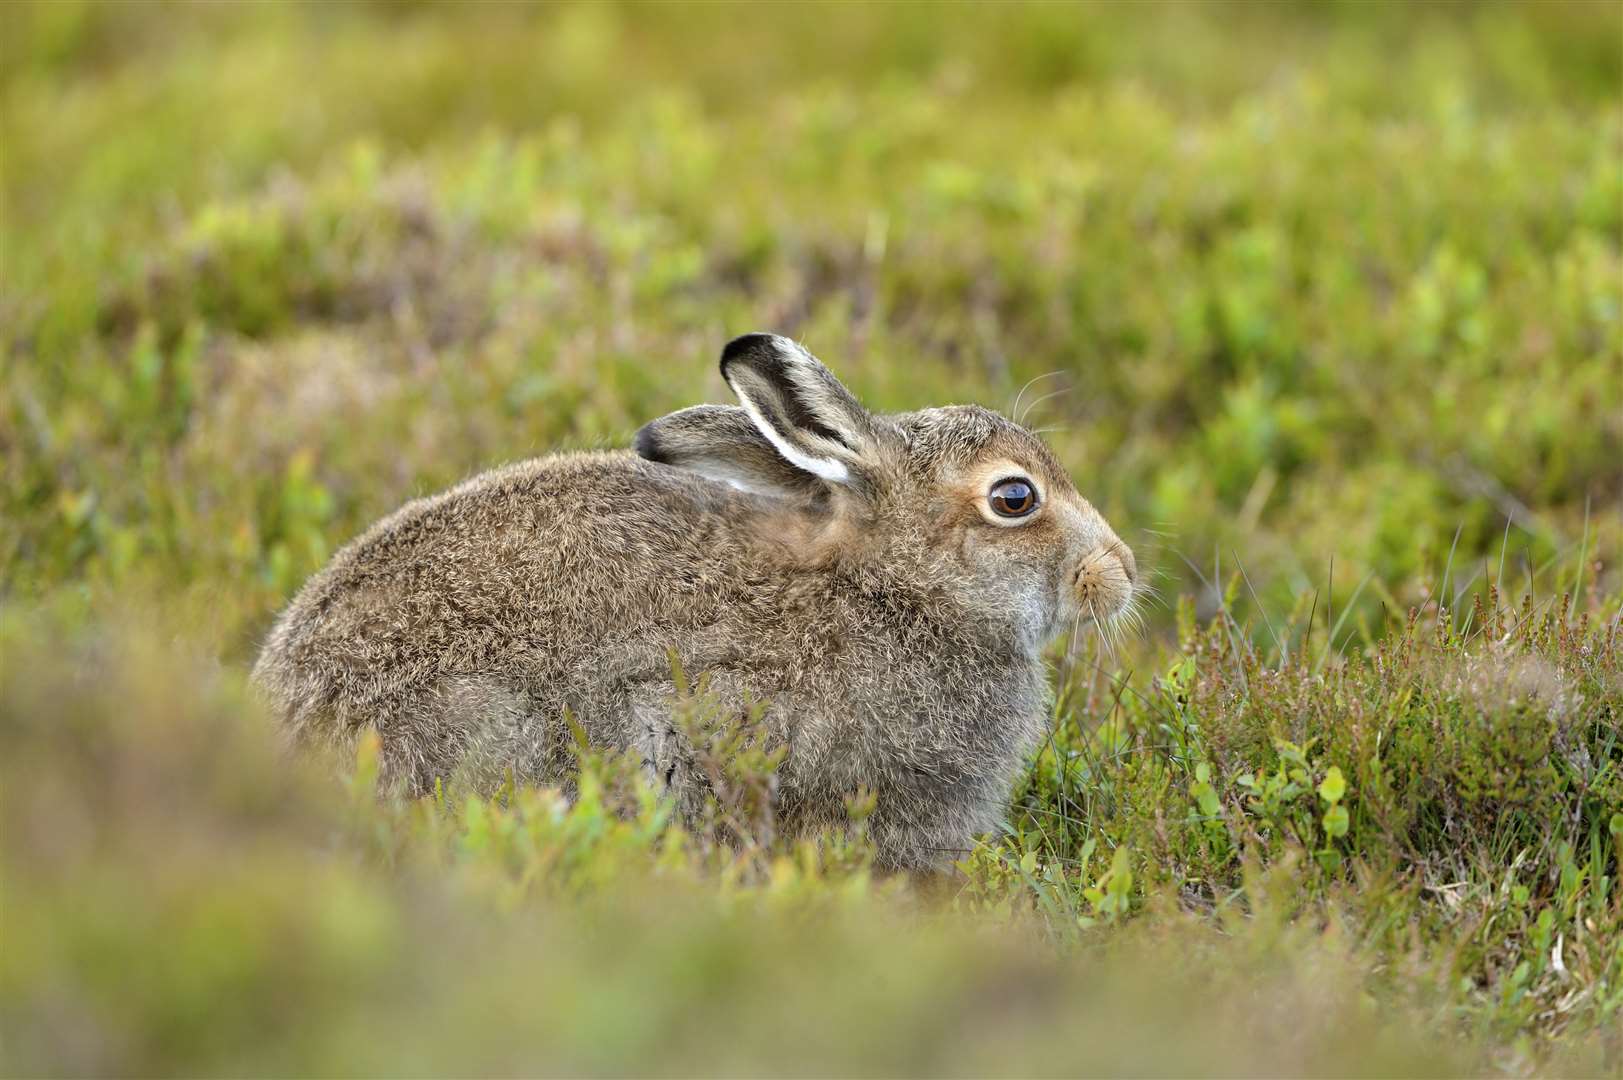 Mountain hare, Lepus timidus, in its summer coat. ©Lorne Gill